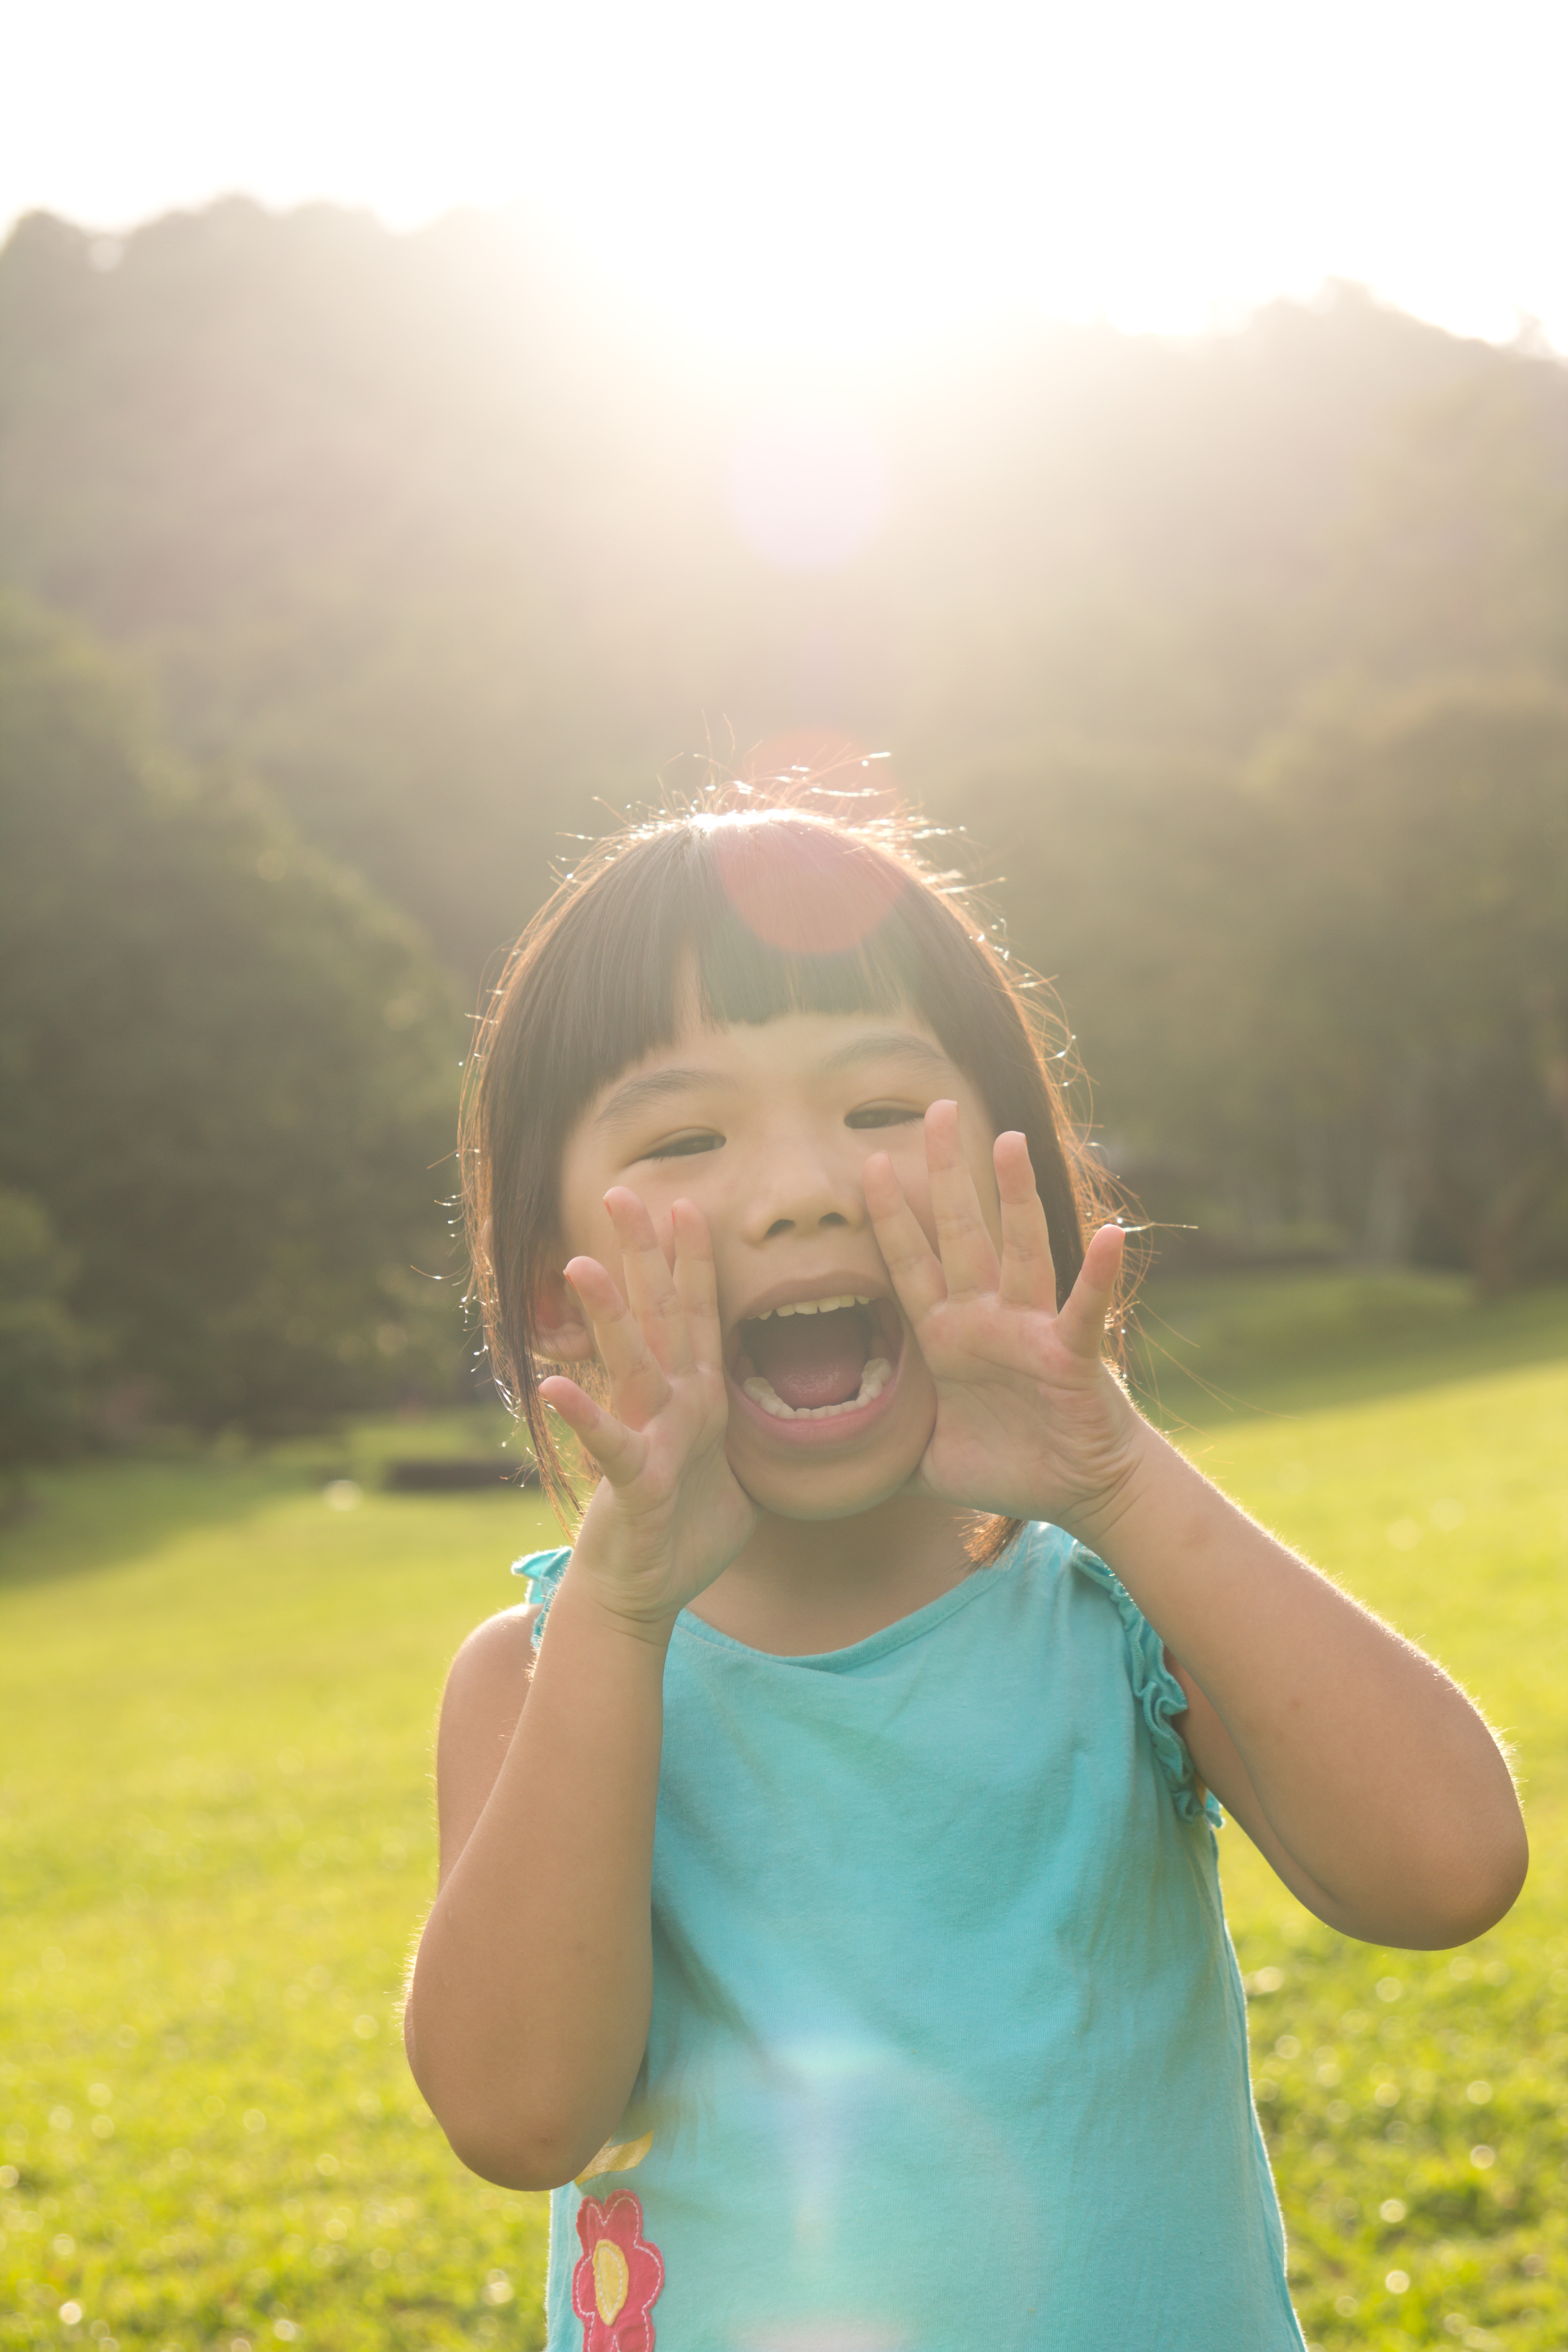 Asian child is shouting at park against sunlight